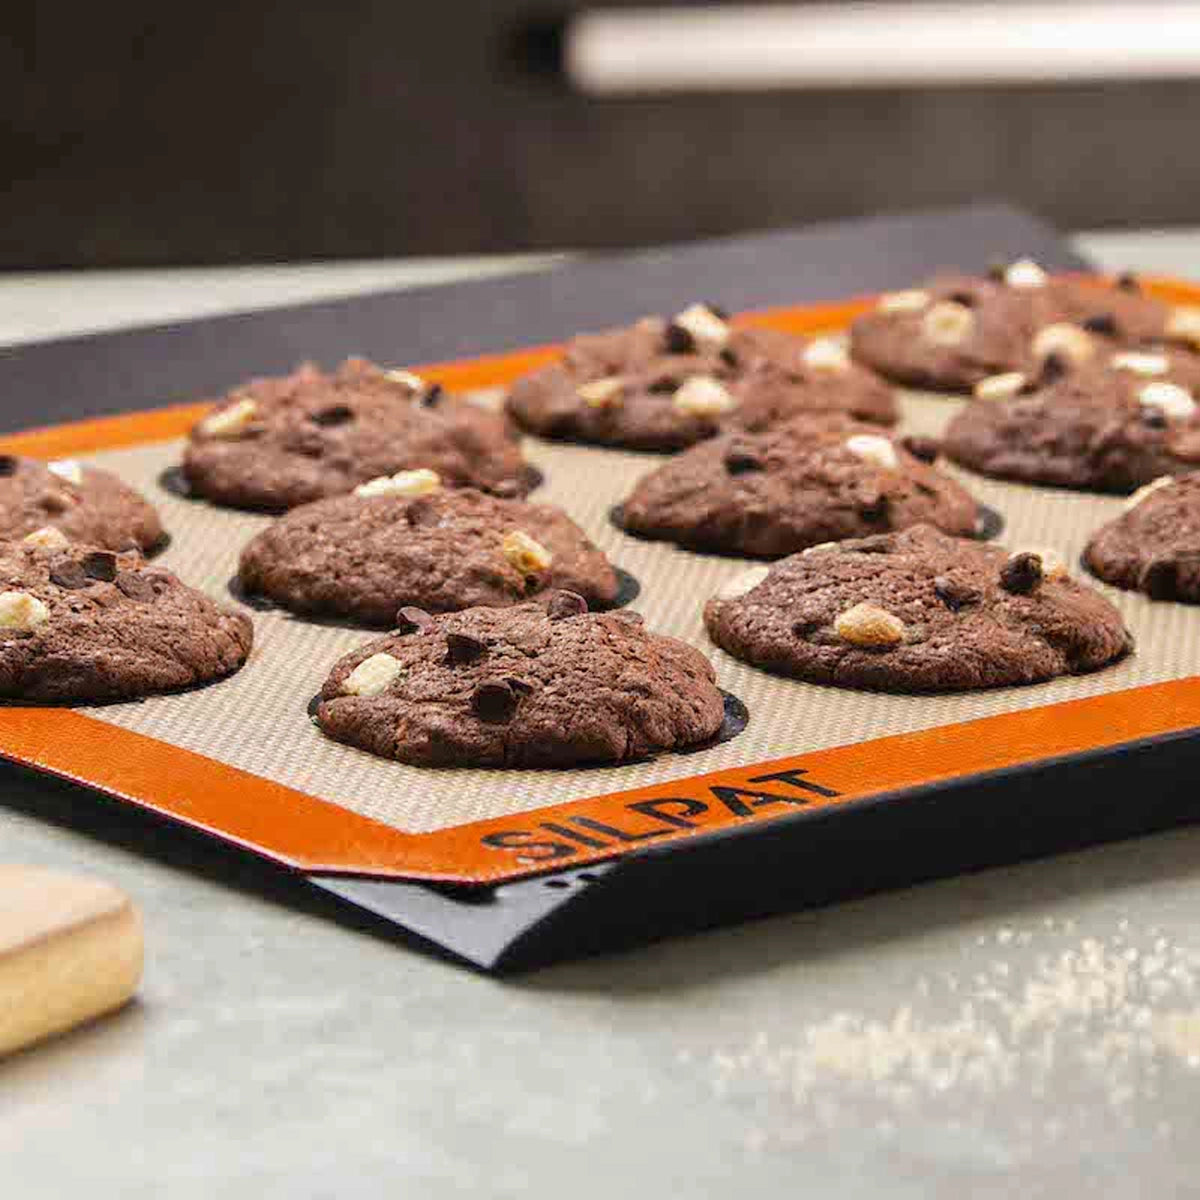 The Silpat Perfect Cookie Mat Is a Must-Have Kitchen Item for